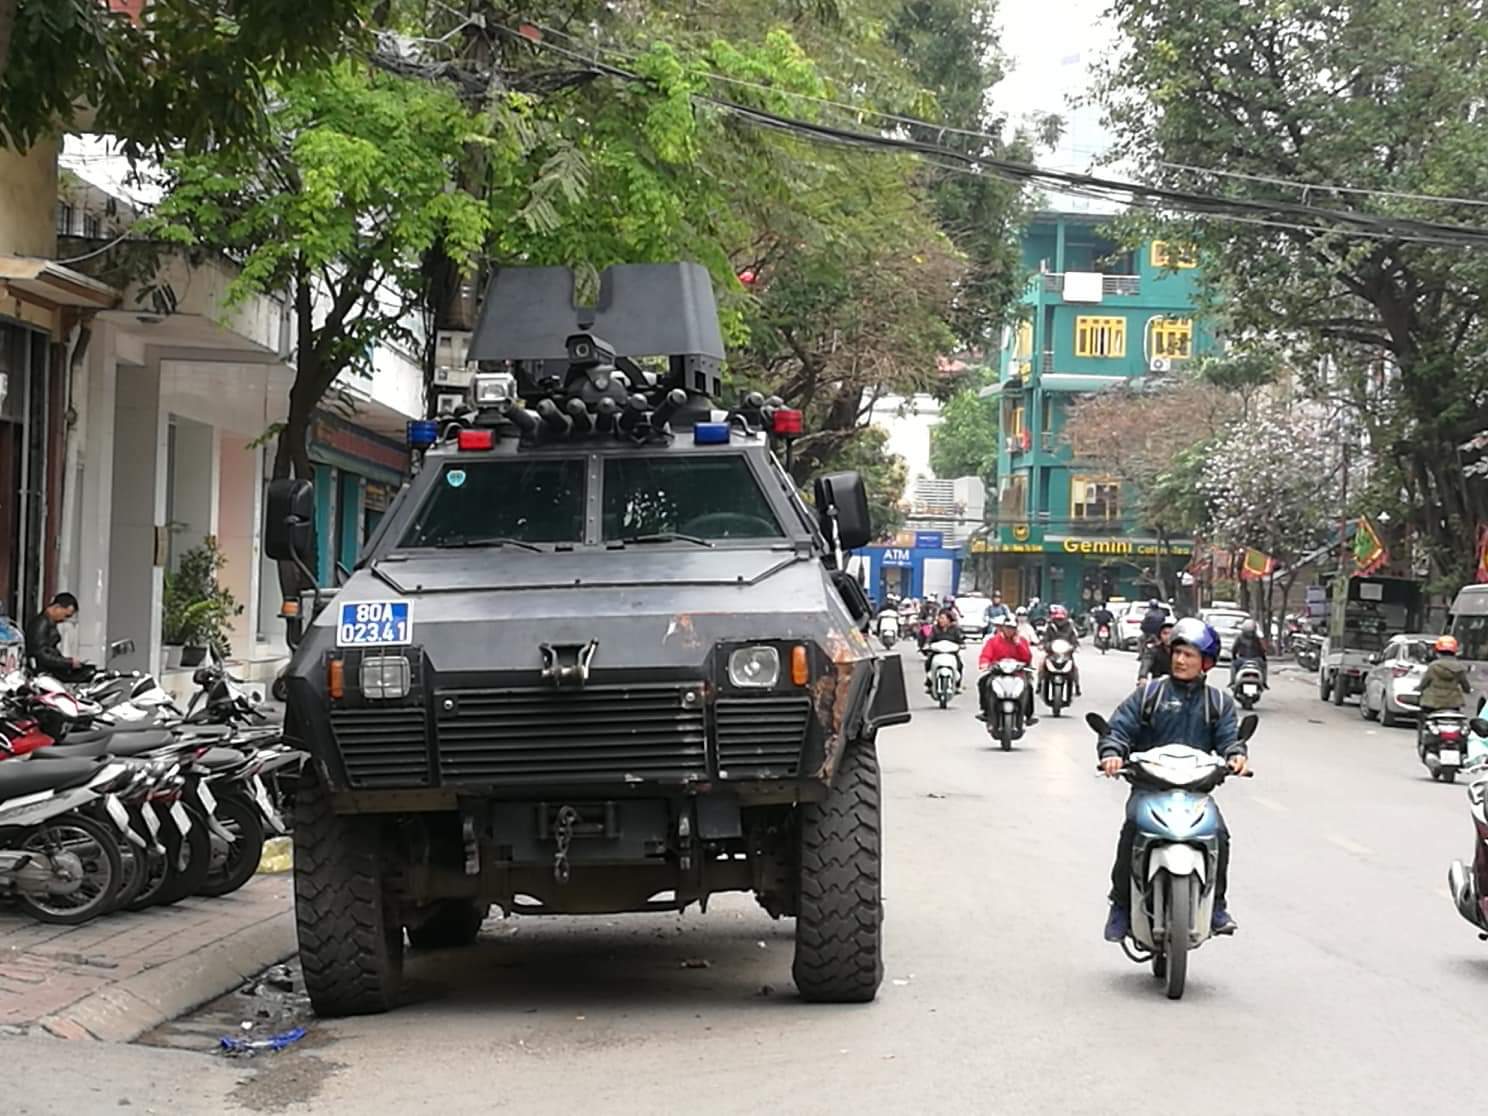 Armed vehicles appeared on the street, tightening Hanoi safely before the American Conference - Trieu - 1